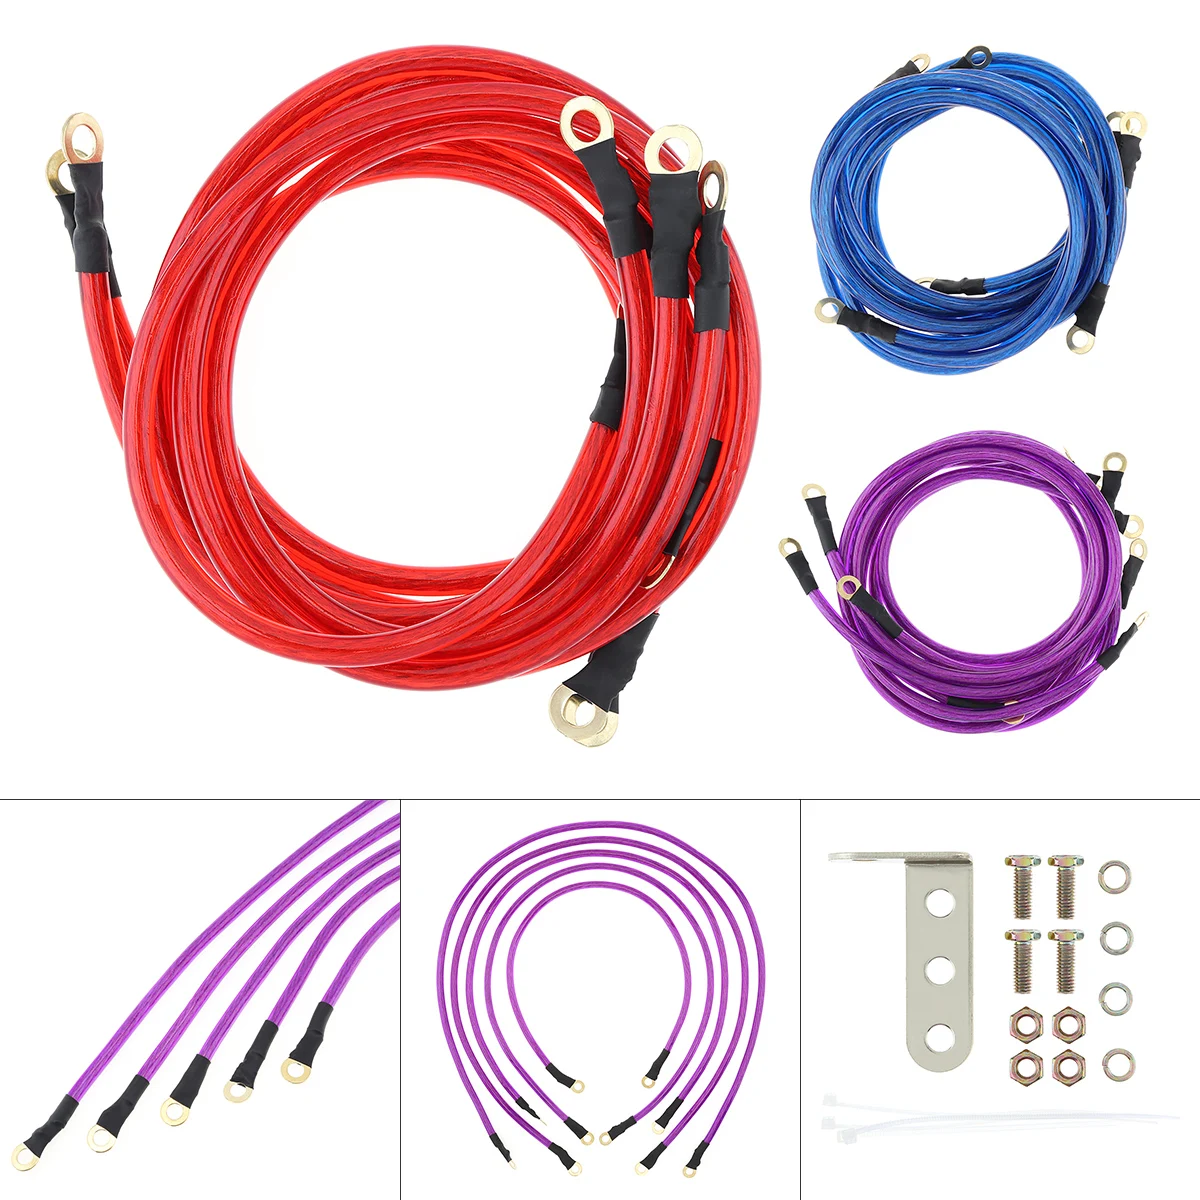 

Conversion Cables 5 Points Car Universal Earth Ground Cables Grounding Wire System Kit High Performance Improve Power